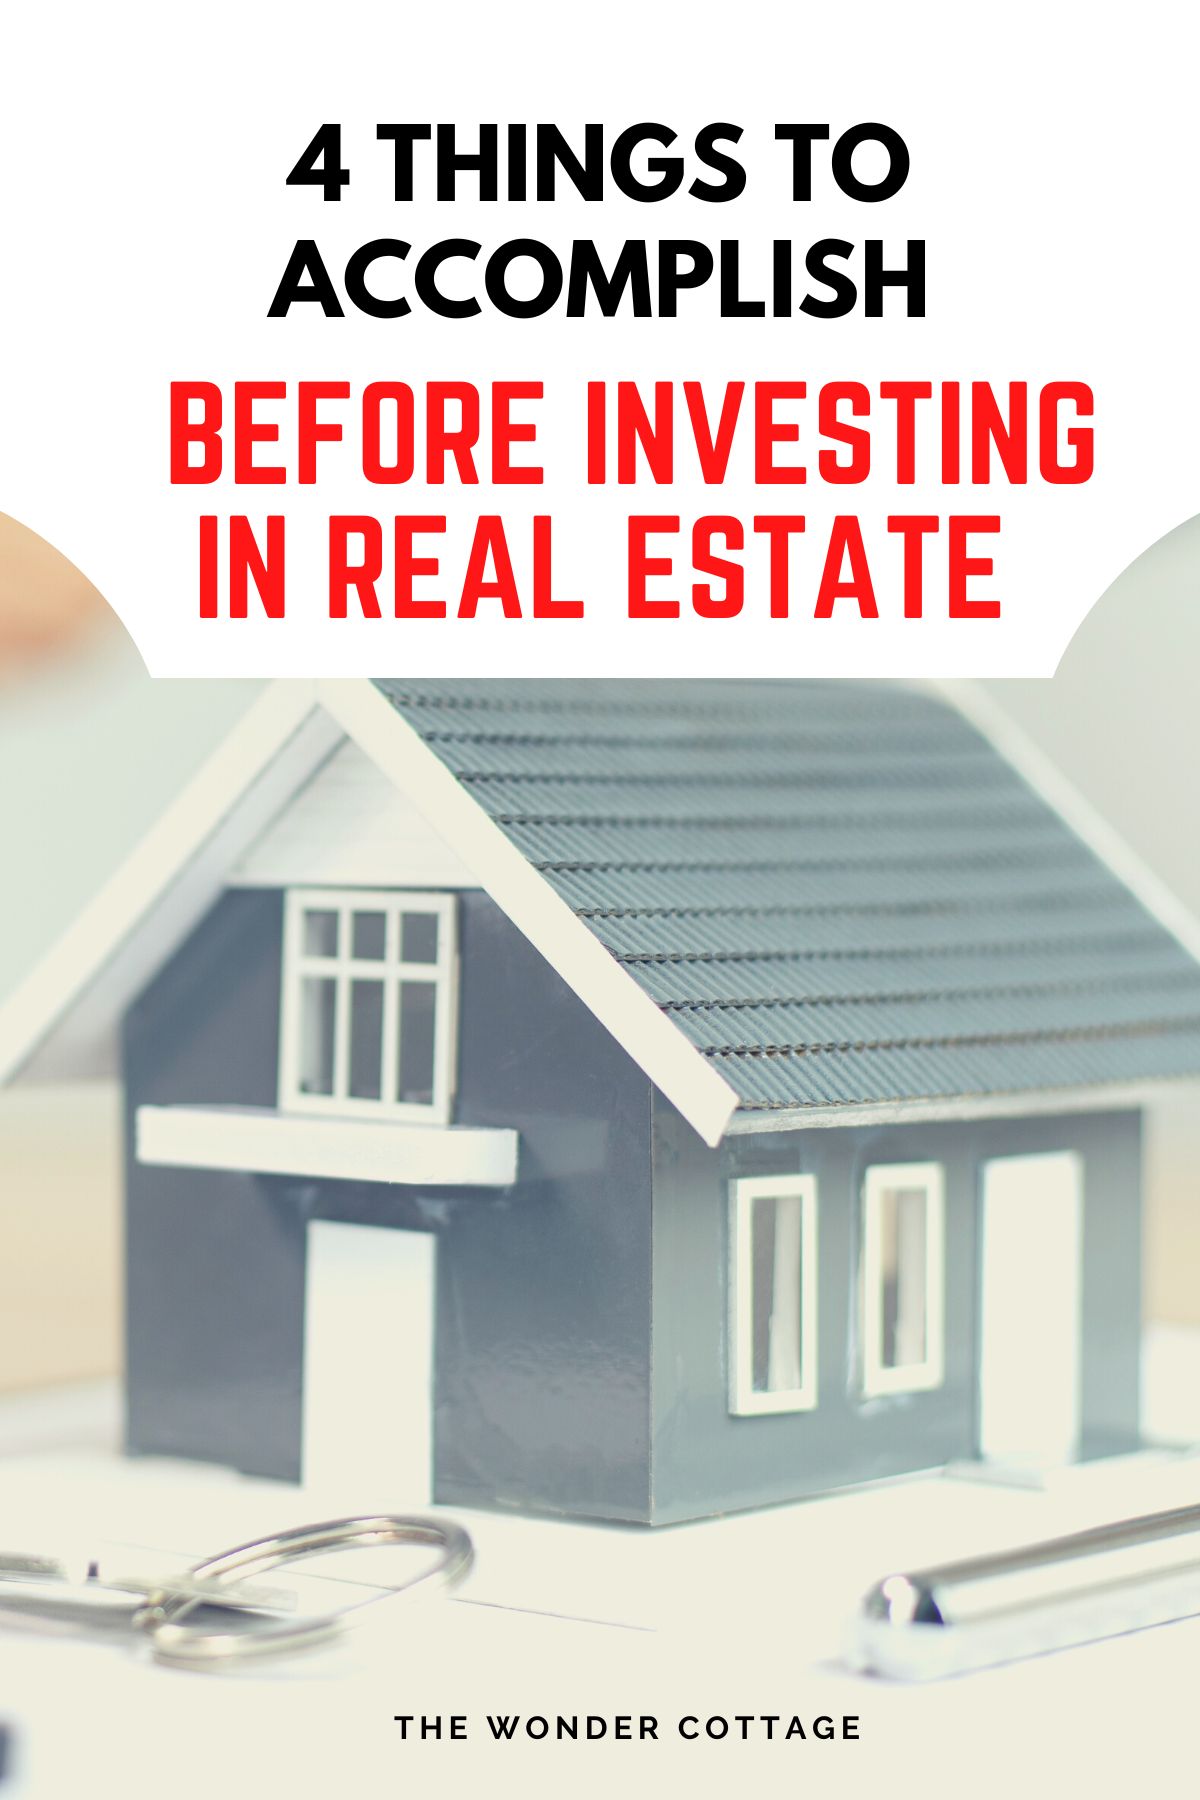 4 Things To Accomplish Before Investing In Real Estate